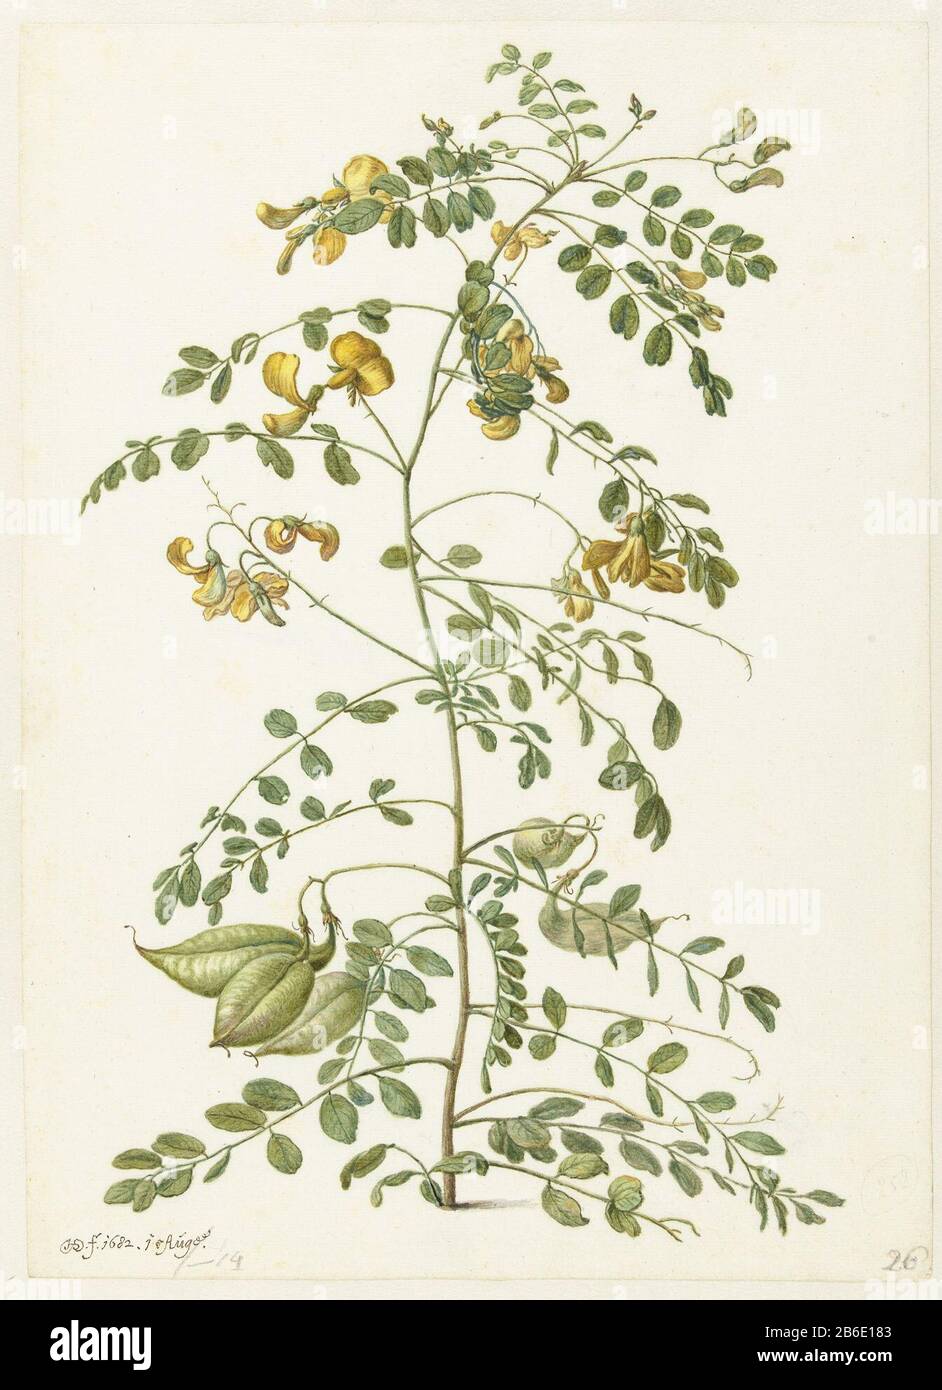 Blazenstruik (Colutea arborescens) Blowing Bush (Colutea arborescens) Property Type: Drawing Object number: RP-T-1948-92 Inscriptions / Brands' Collutea vesicaria / Pseudo Senna' Manufacturer : artist: Herman Saftleven Dating: Aug 15 1682 Physical features: brush water paint in color material: paper watercolor Technique: brush dimensions: h 355 mm × W 255 mm Subject: plants and herbs (with NAME) plants and herbs (with NAME) Stock Photo